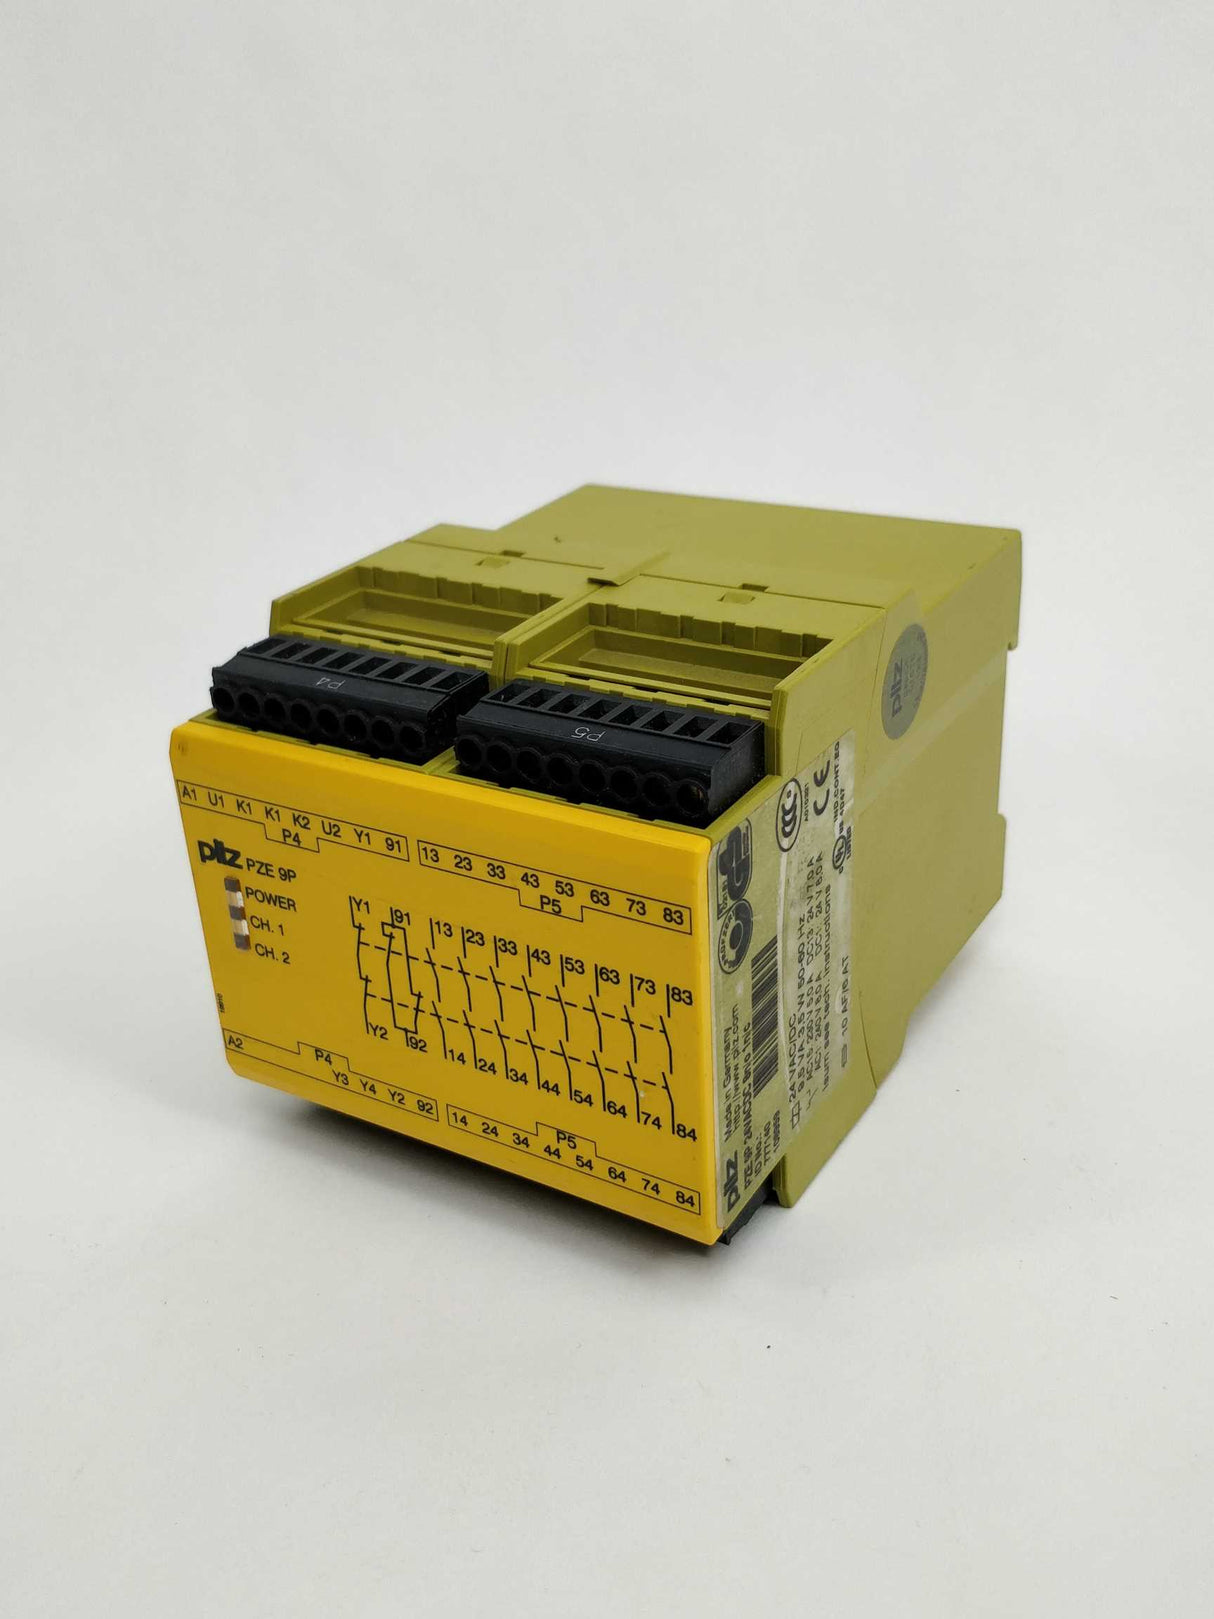 Pilz 777140 PZE 9P Safety relay